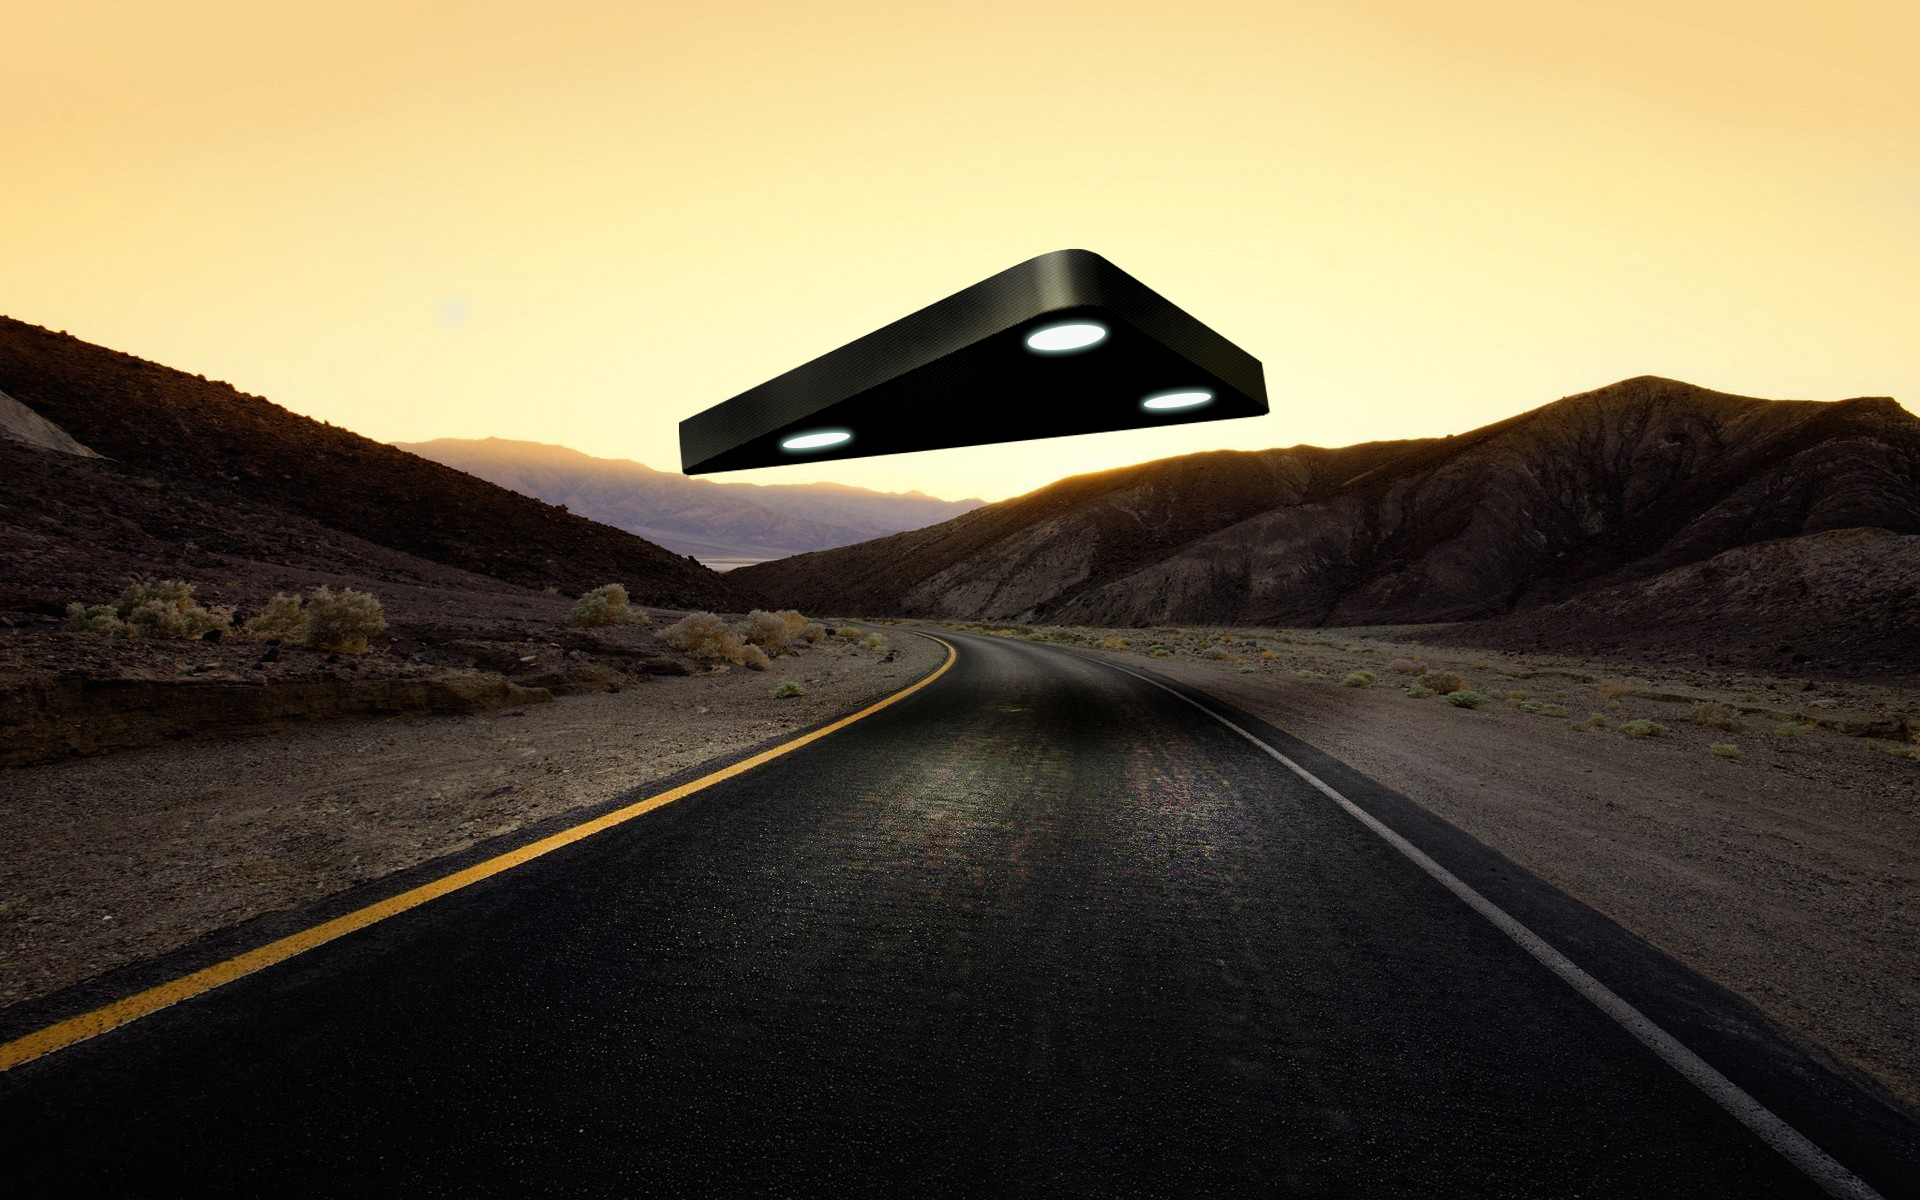 General 1920x1200 flying saucers spaceship digital art glowing lights triangle road desert mountains shrubs surreal